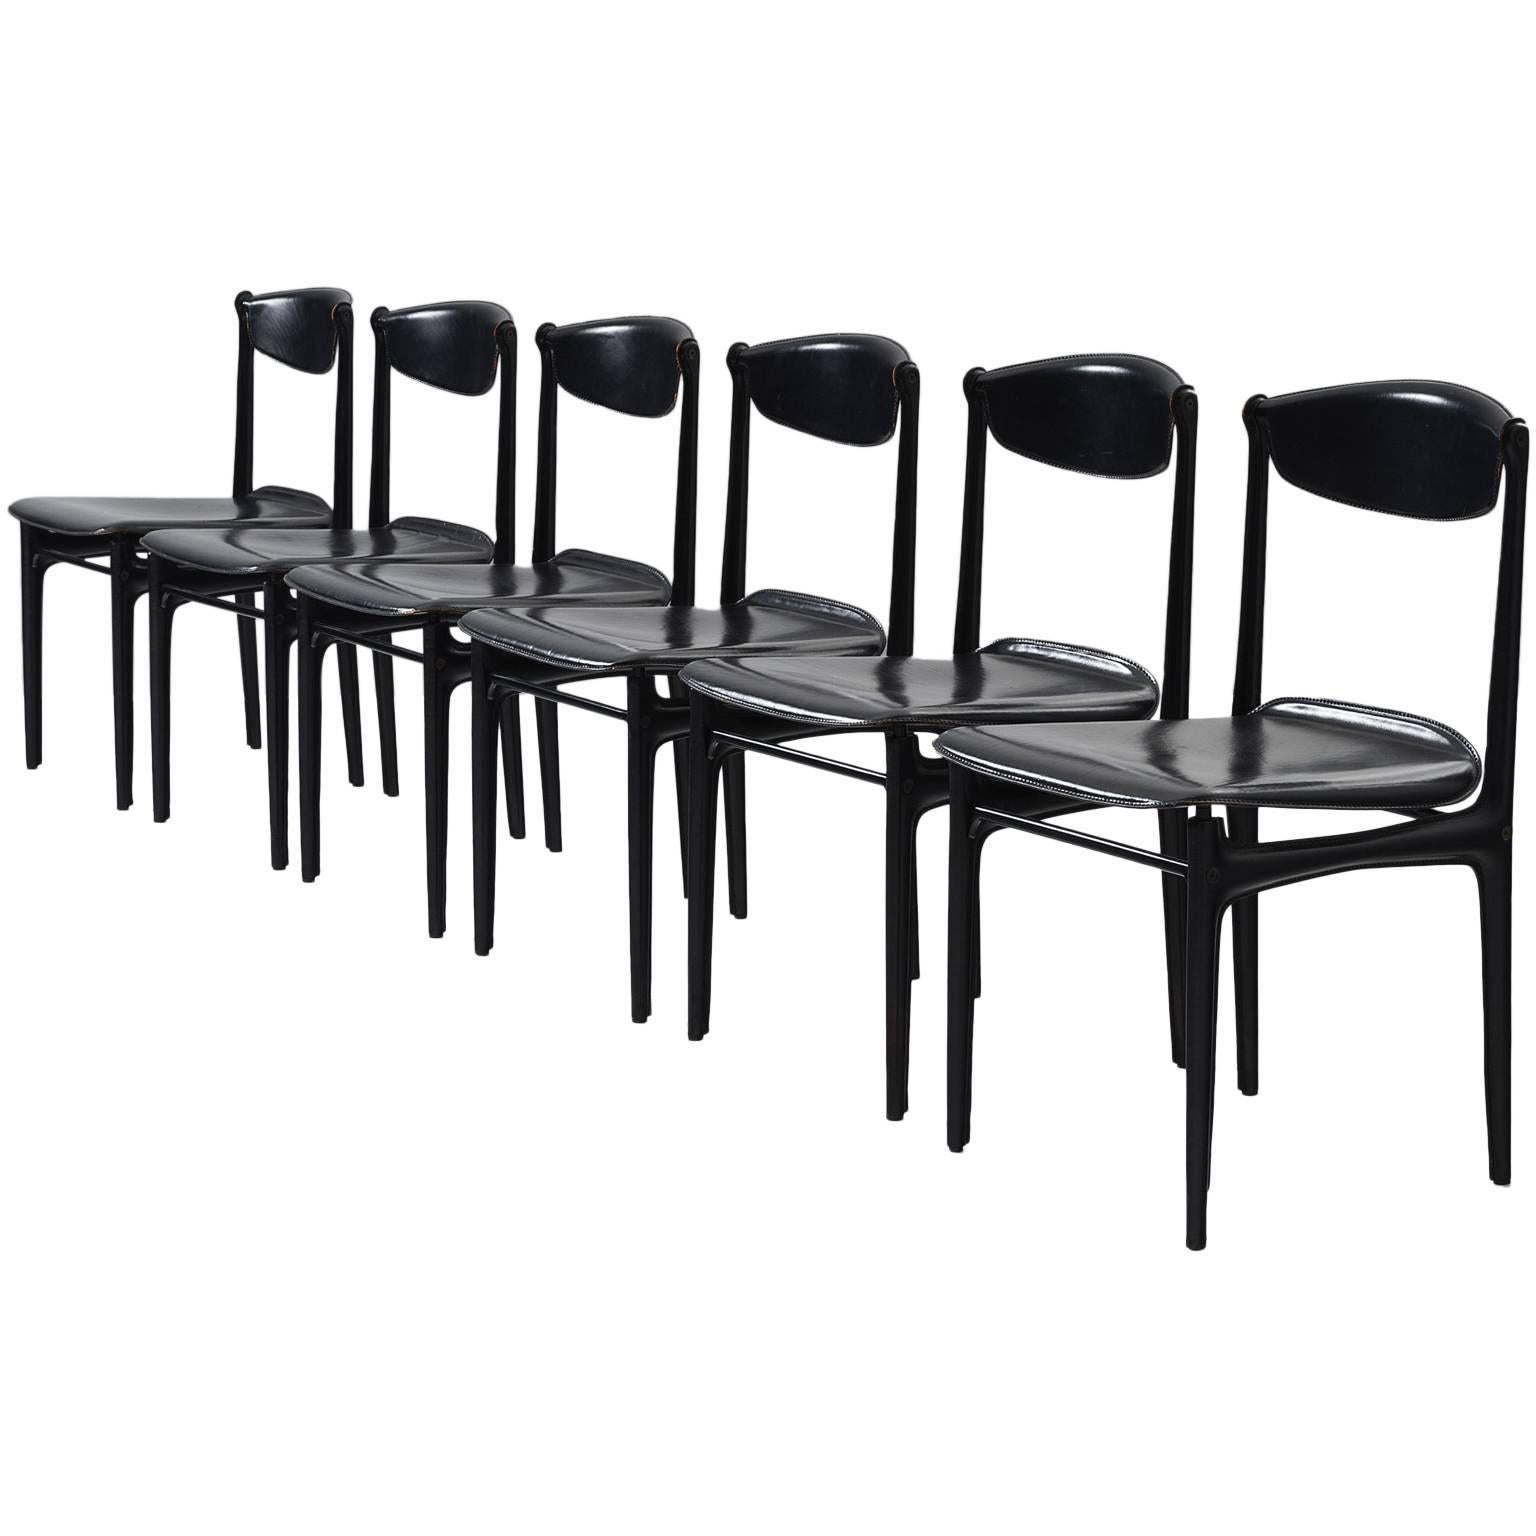 Set of Six Dining Chairs in Black Leather